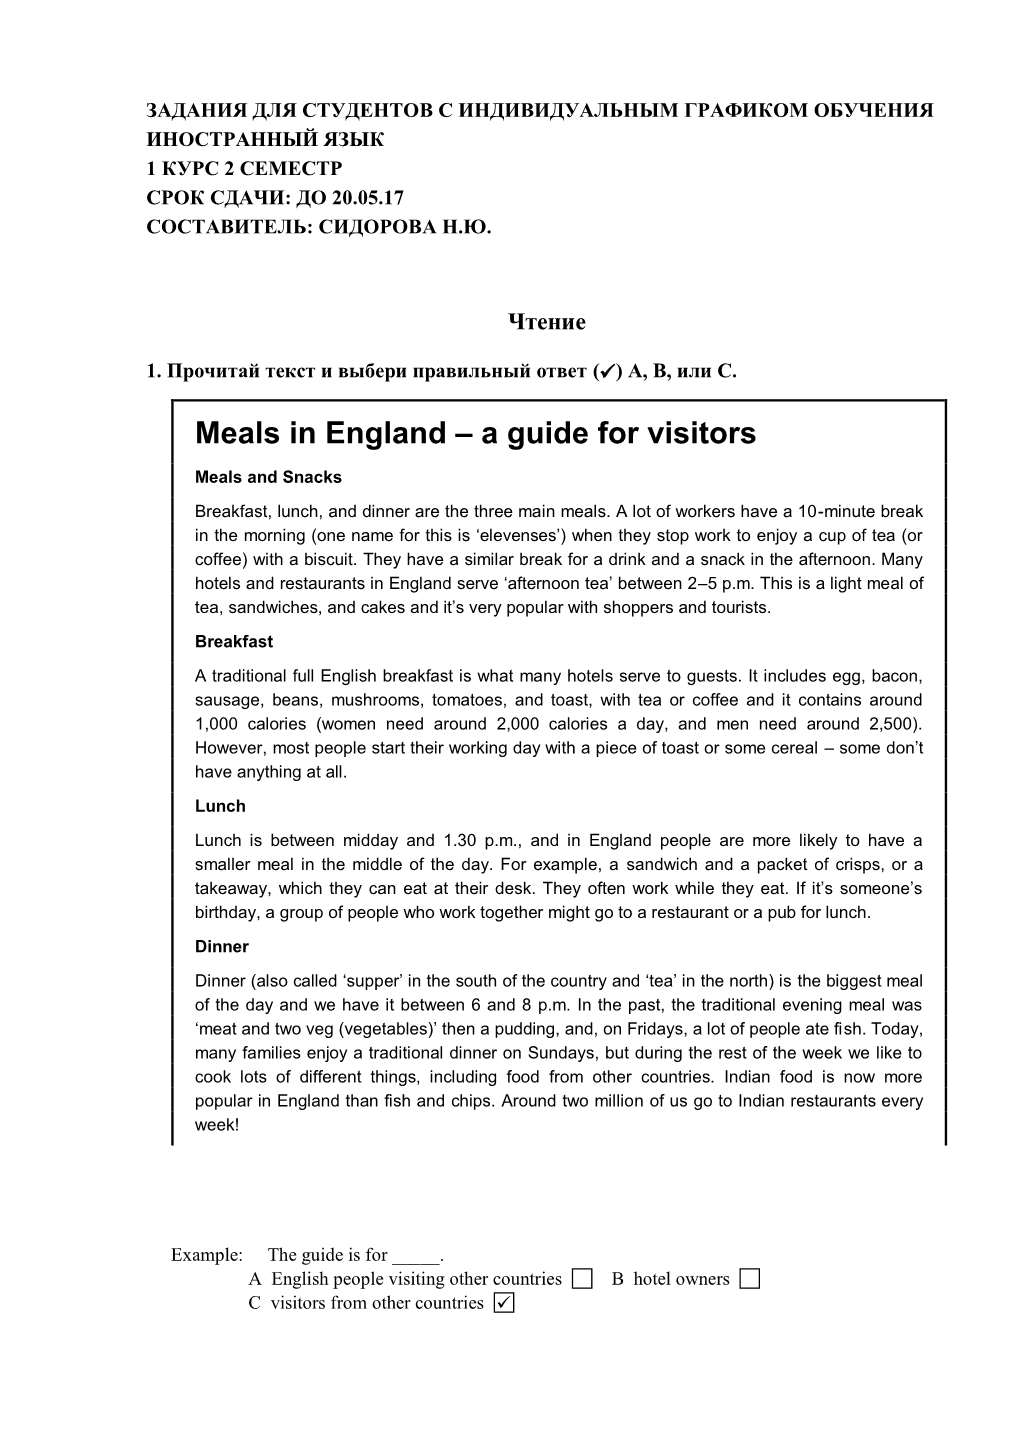 Meals in England – a Guide for Visitors